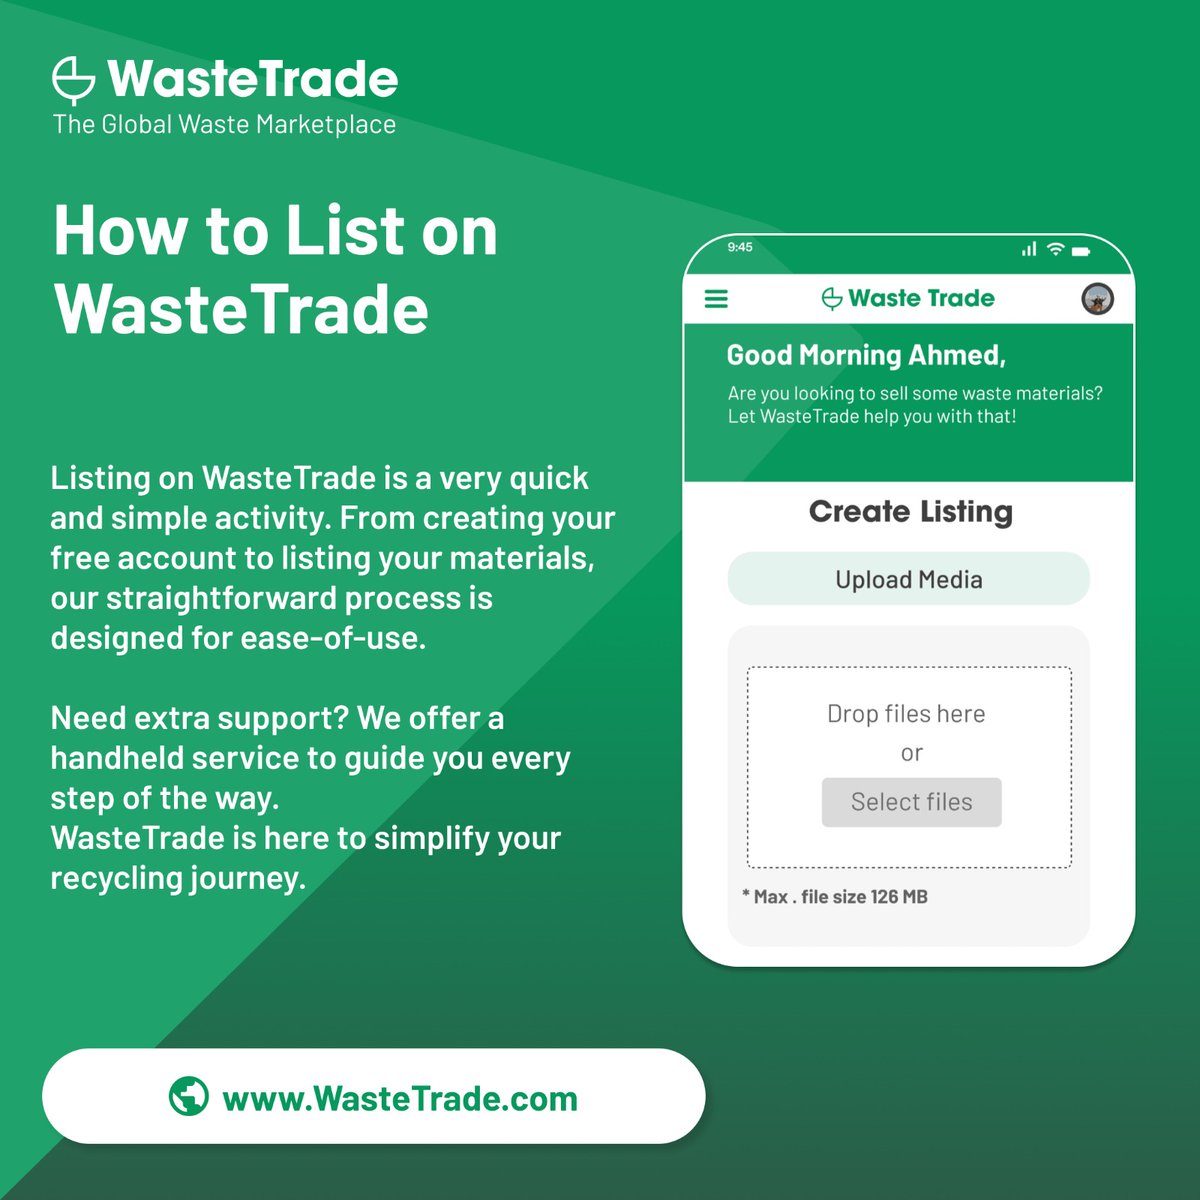 Discover how easy it is to list on WasteTrade!

Let WasteTrade make your recycling journey straightforward and efficient.

Web: shorturl.at/fpqY8

#waste #recycling #wastemanagement #circulareconomy #plasticrecycling #recycler